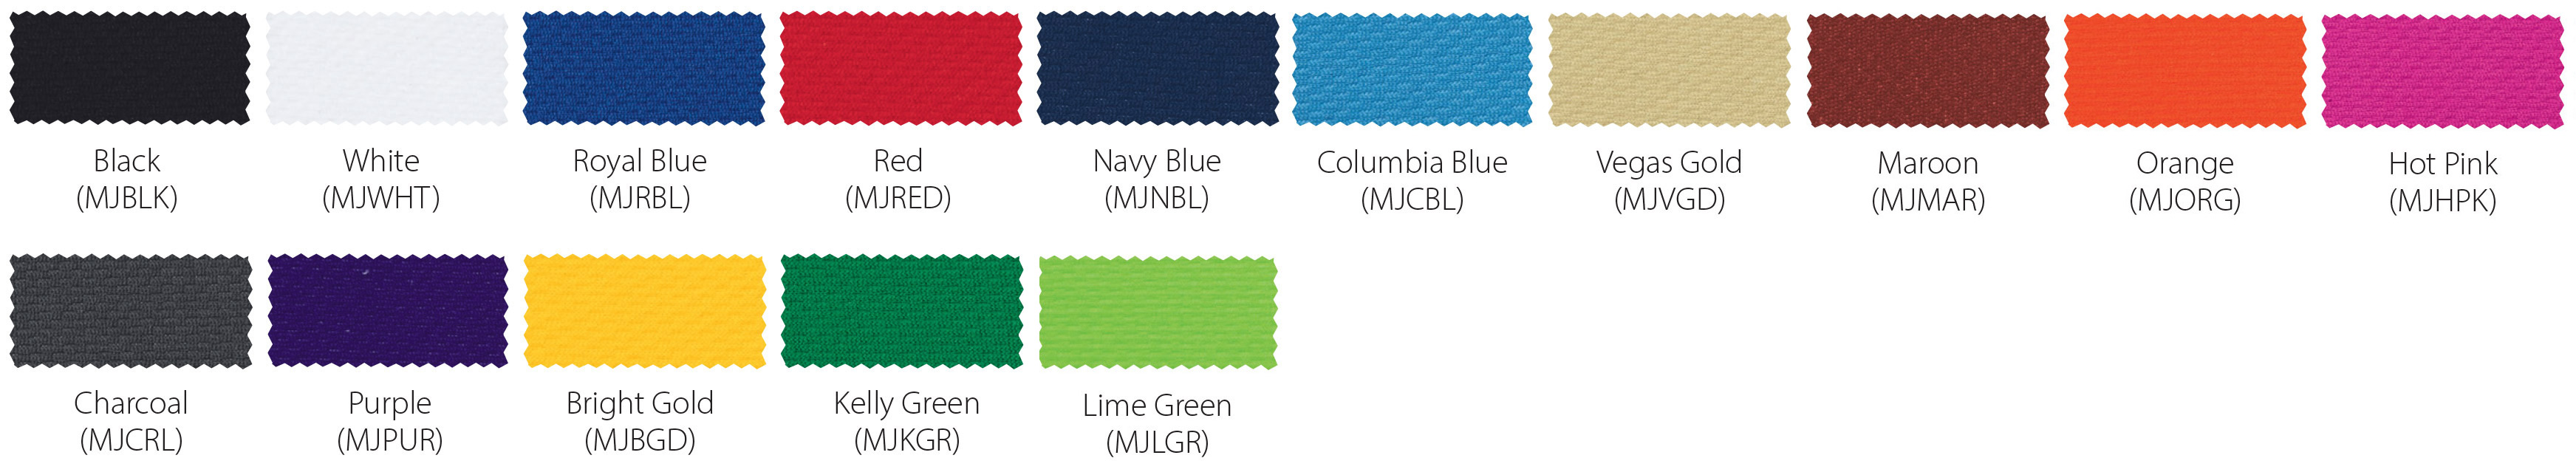 Jersey Colors